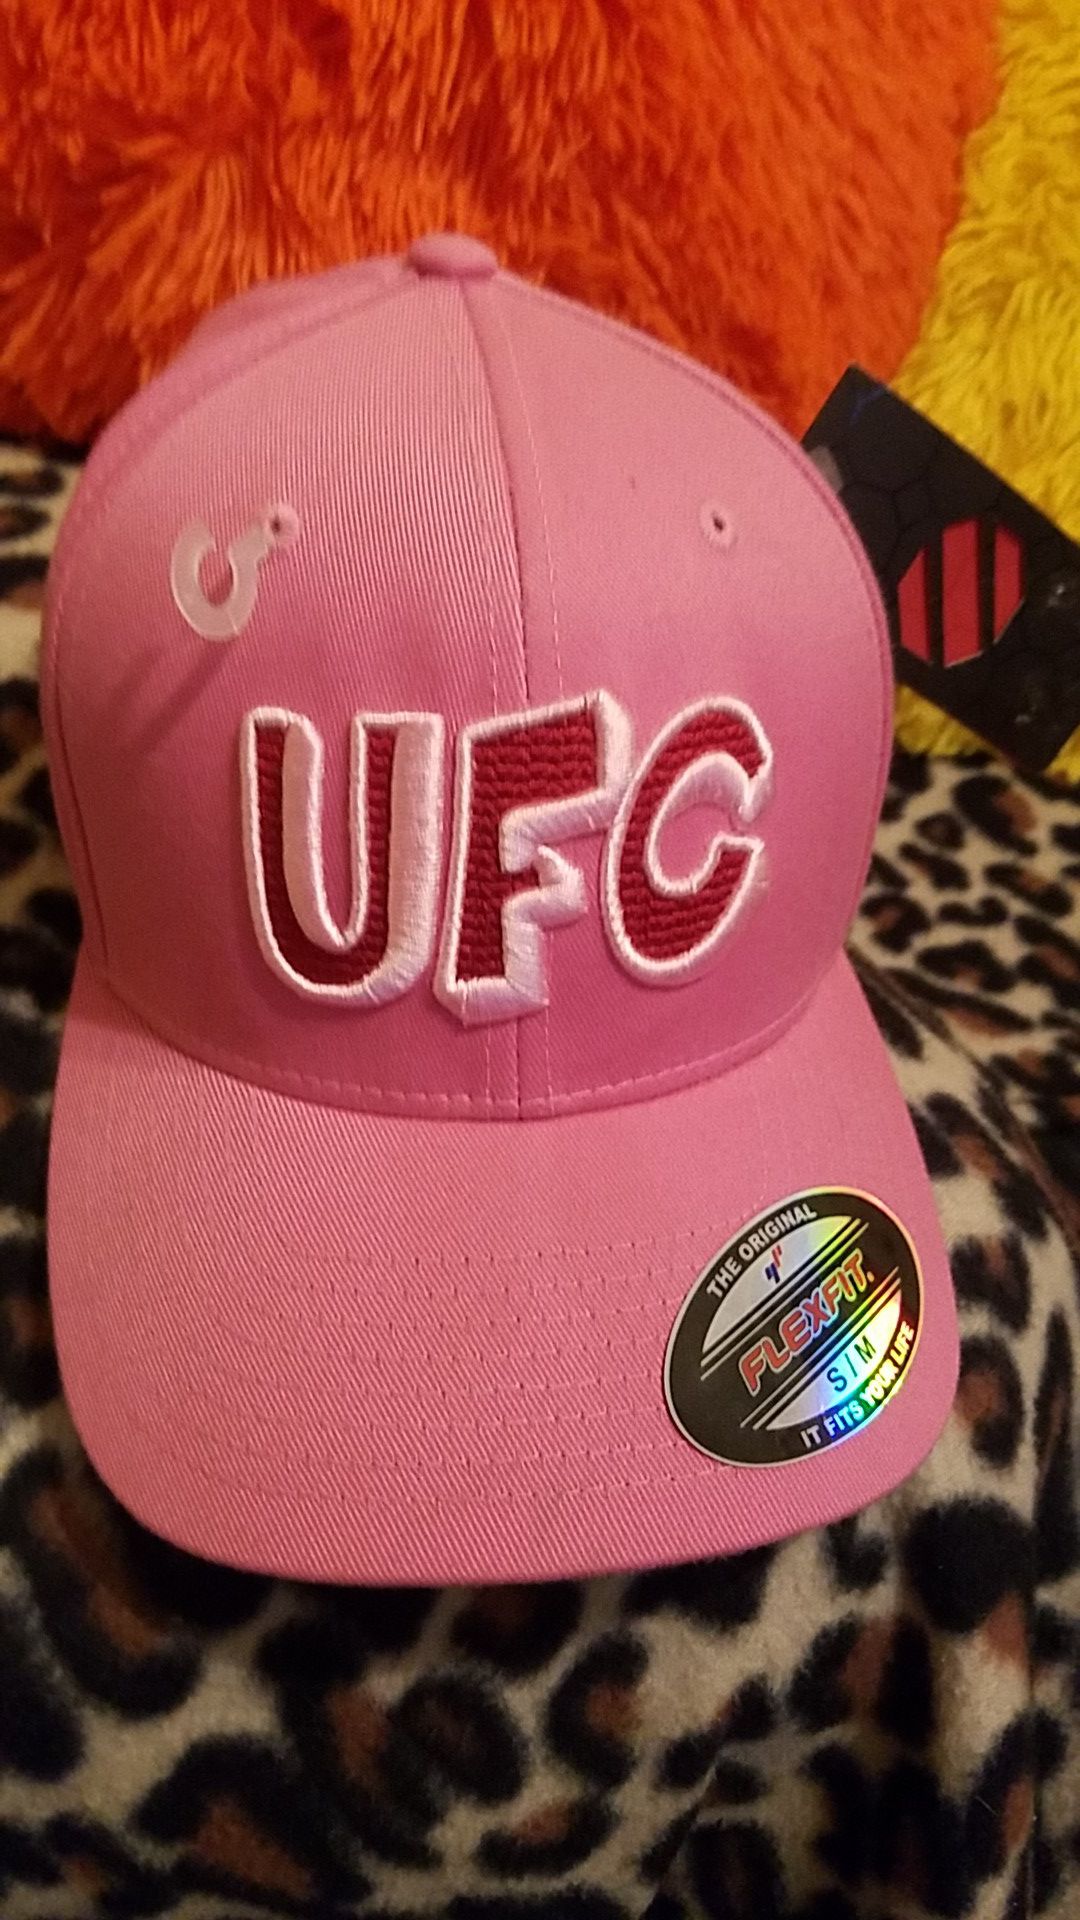 UFC Pink fitted hat size s/m